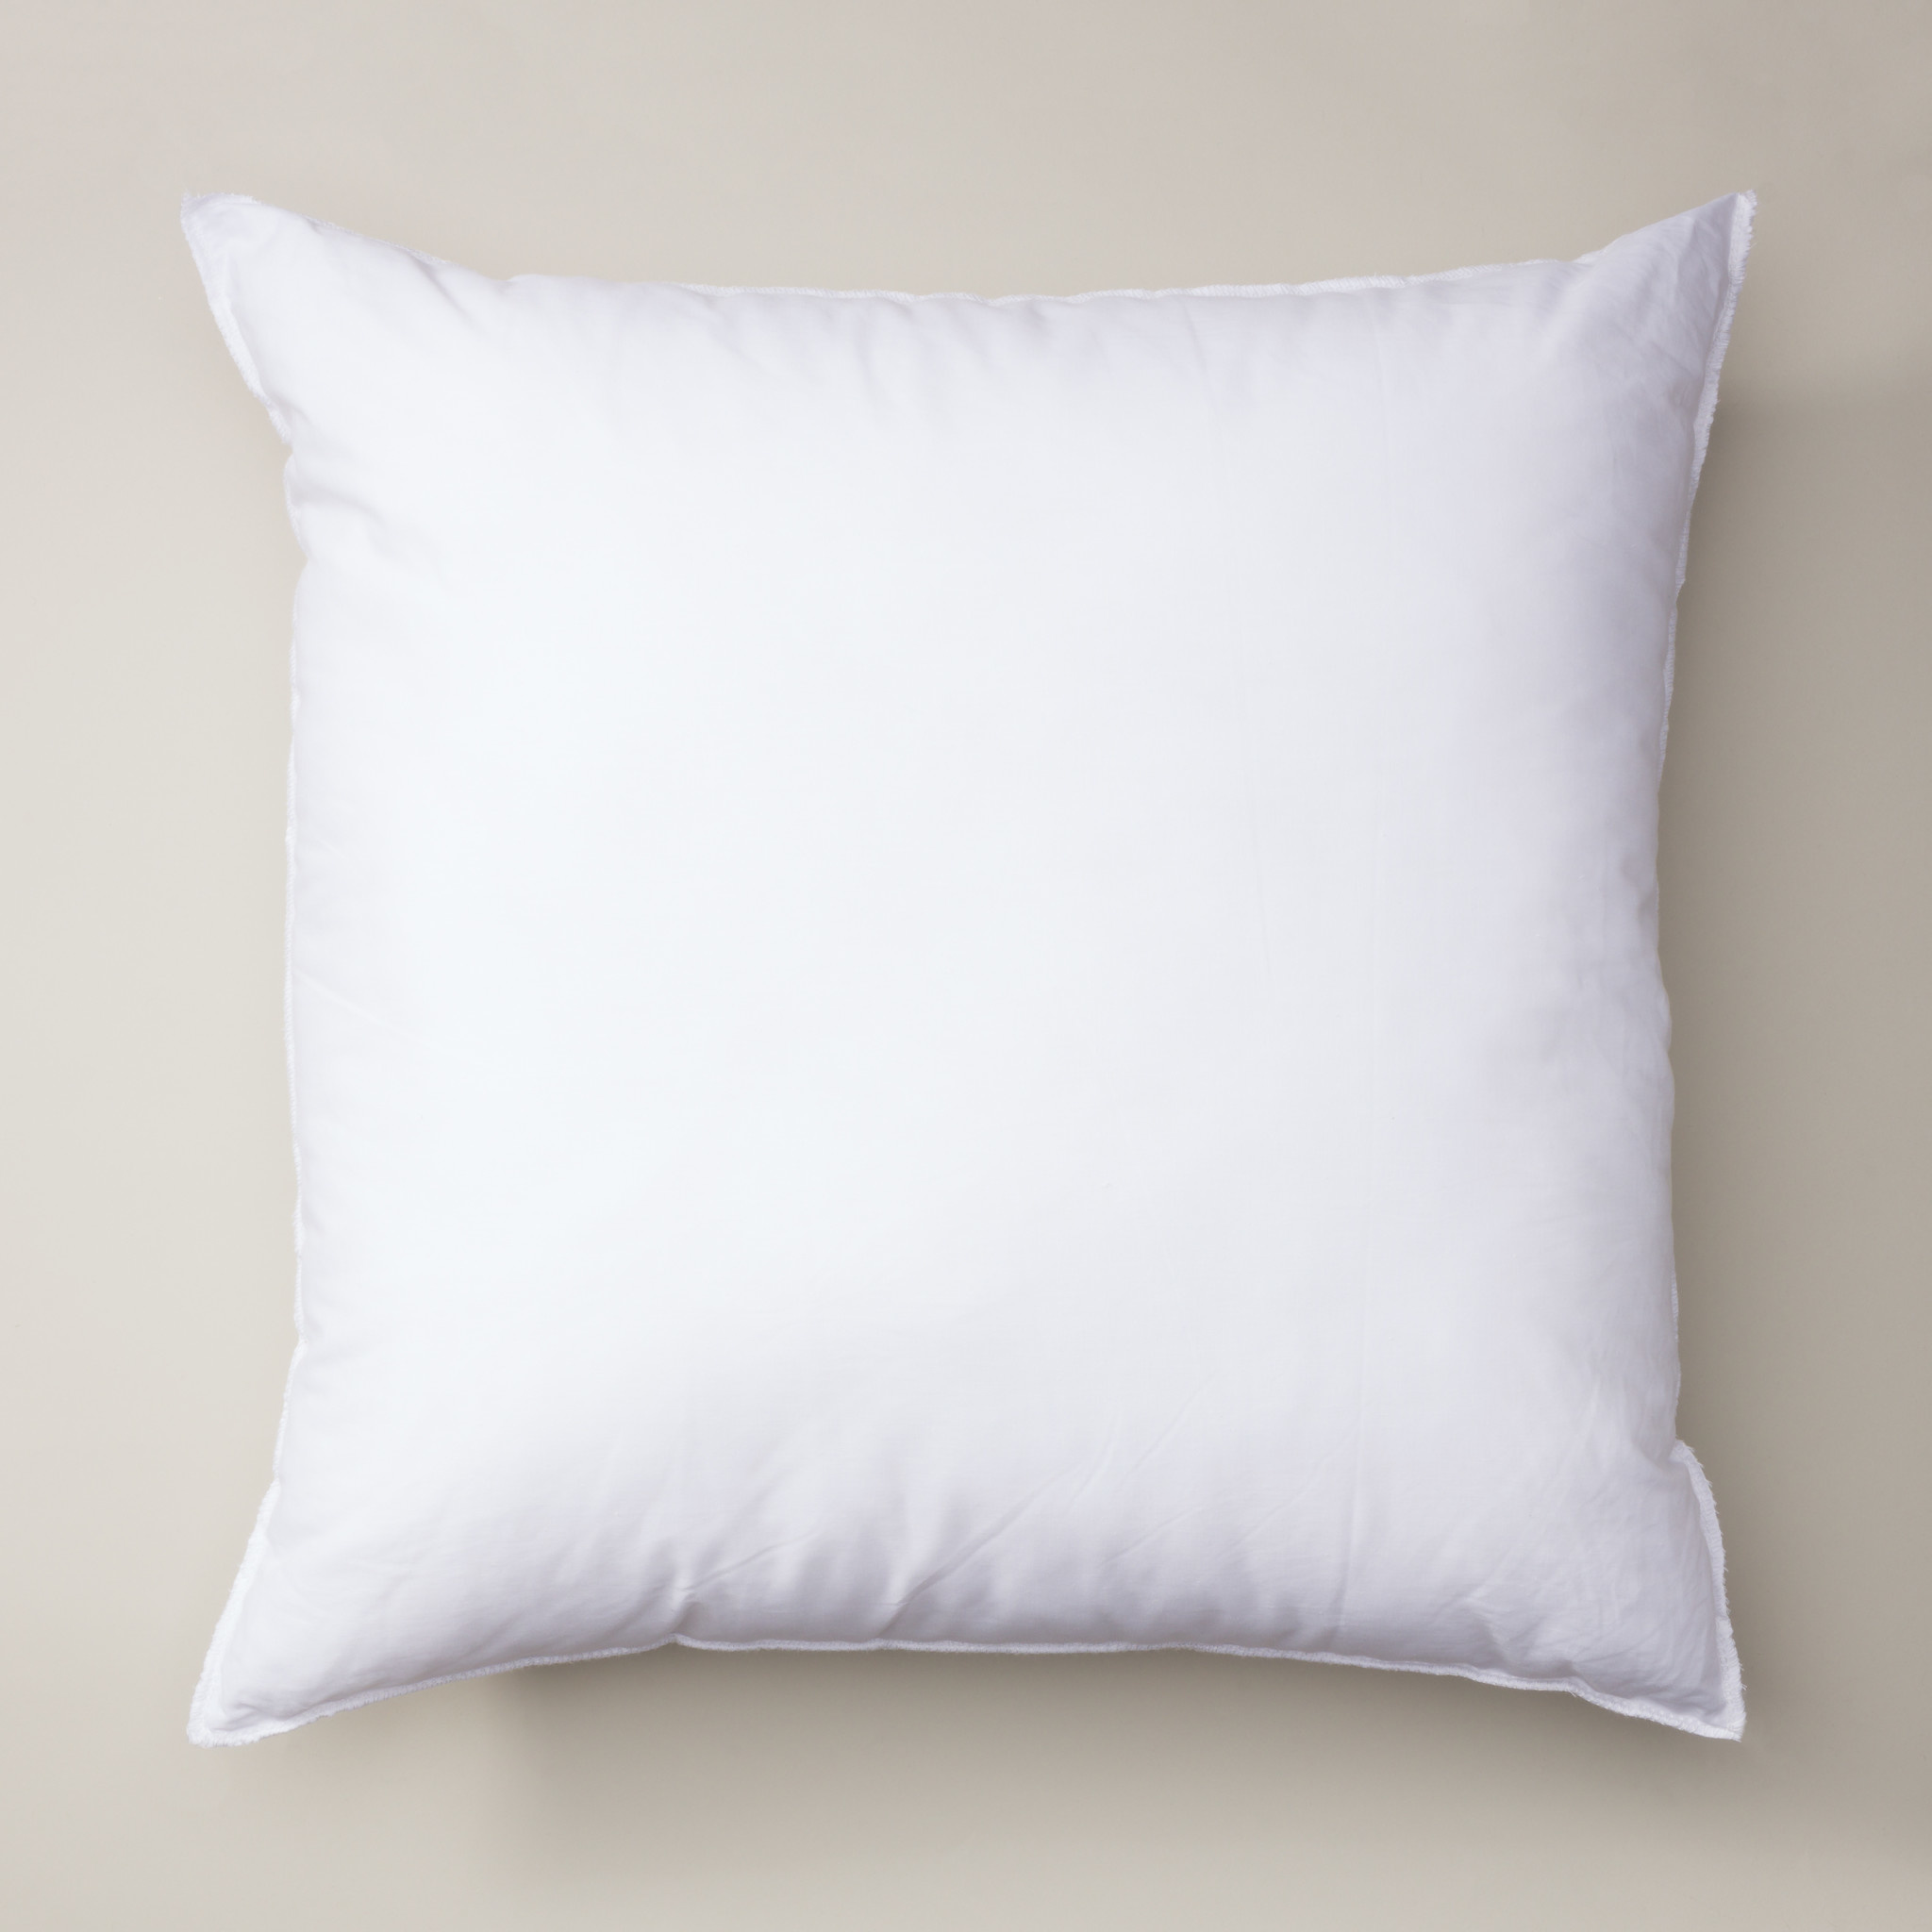 Pillow bio fluff large selection buy at